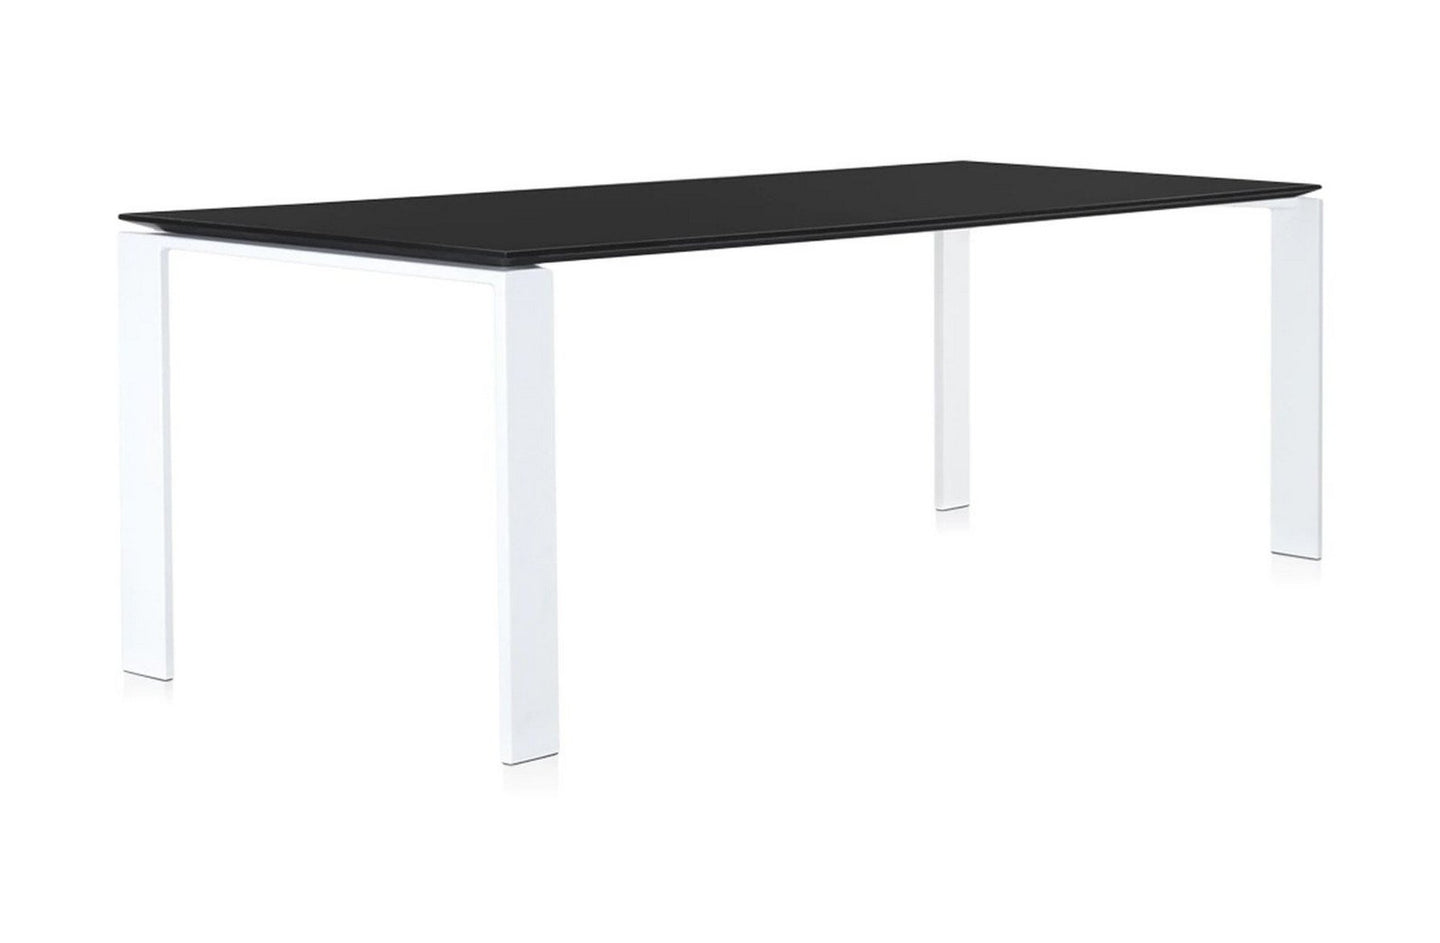 Four Large Table
